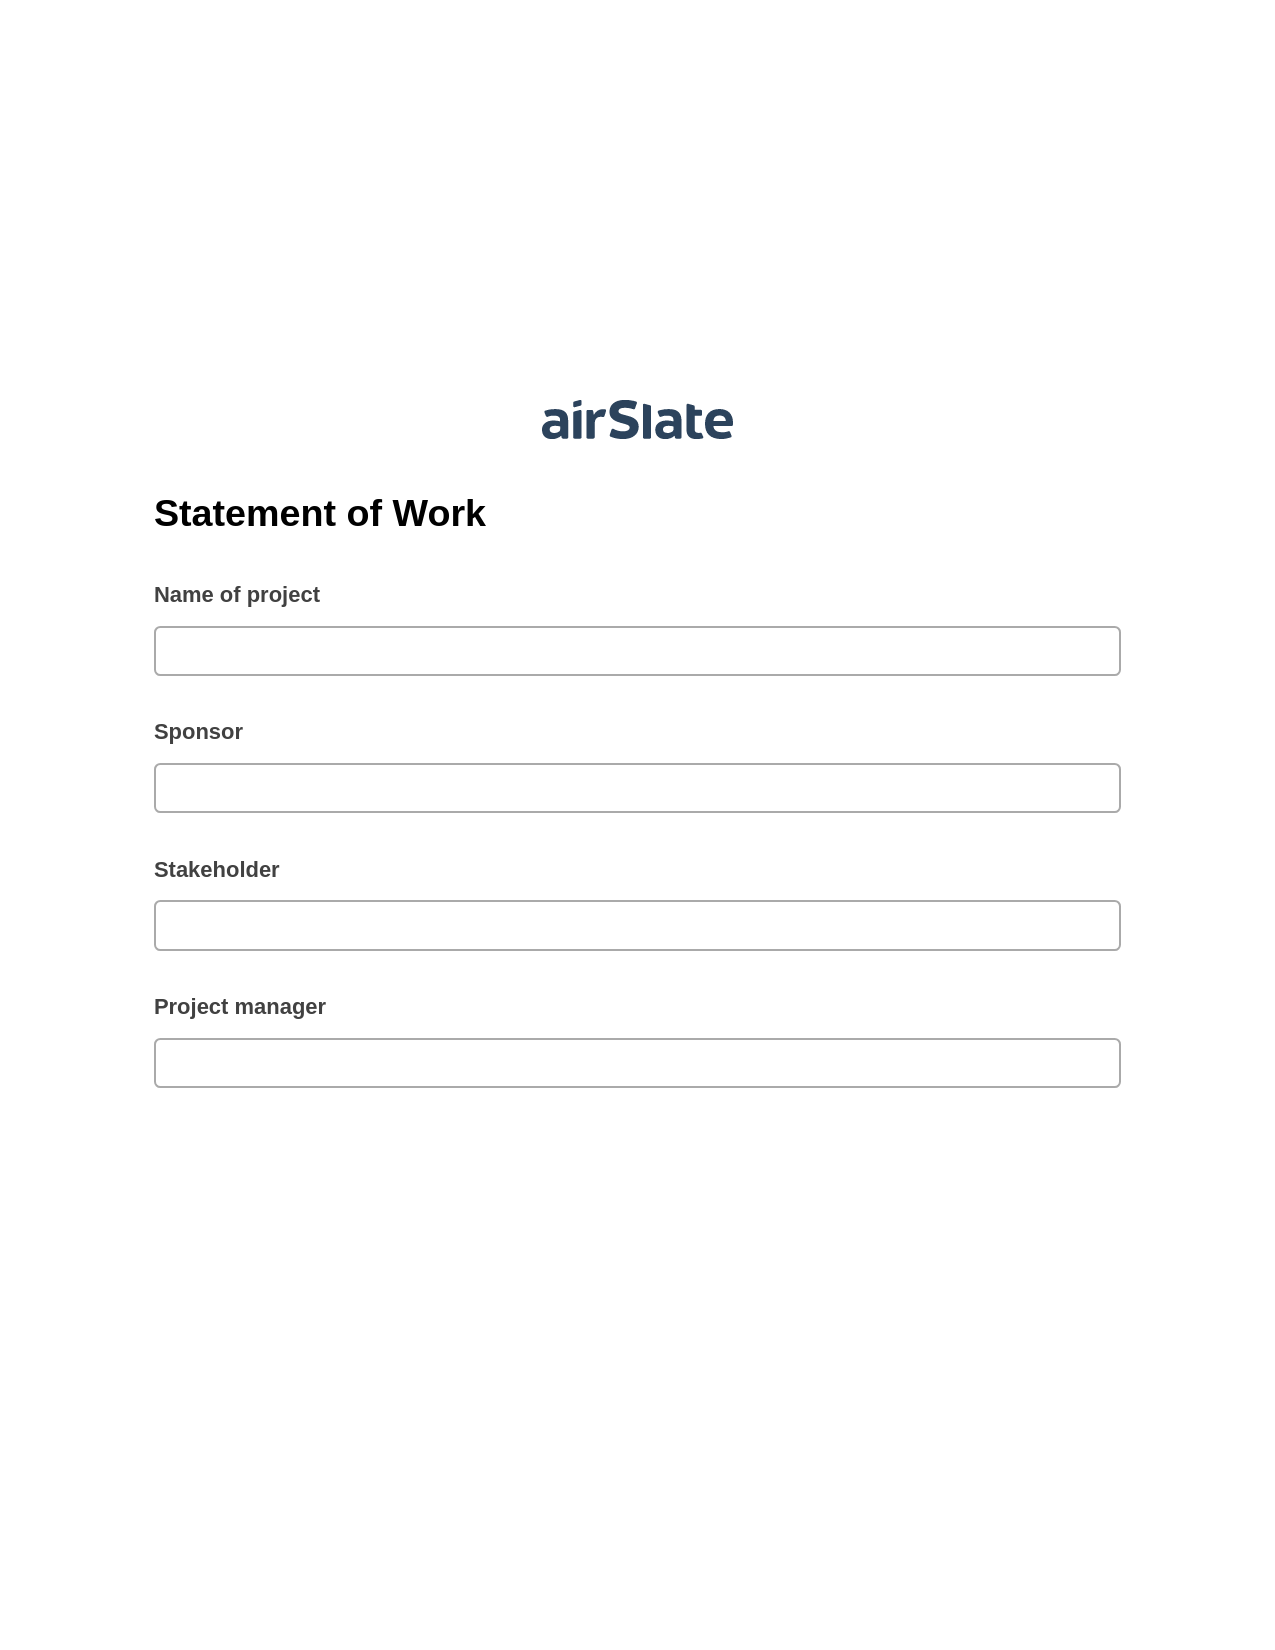 Multirole Statement of Work Pre-fill Document Bot, Assign Roles to Recipients Bot, Box Bot